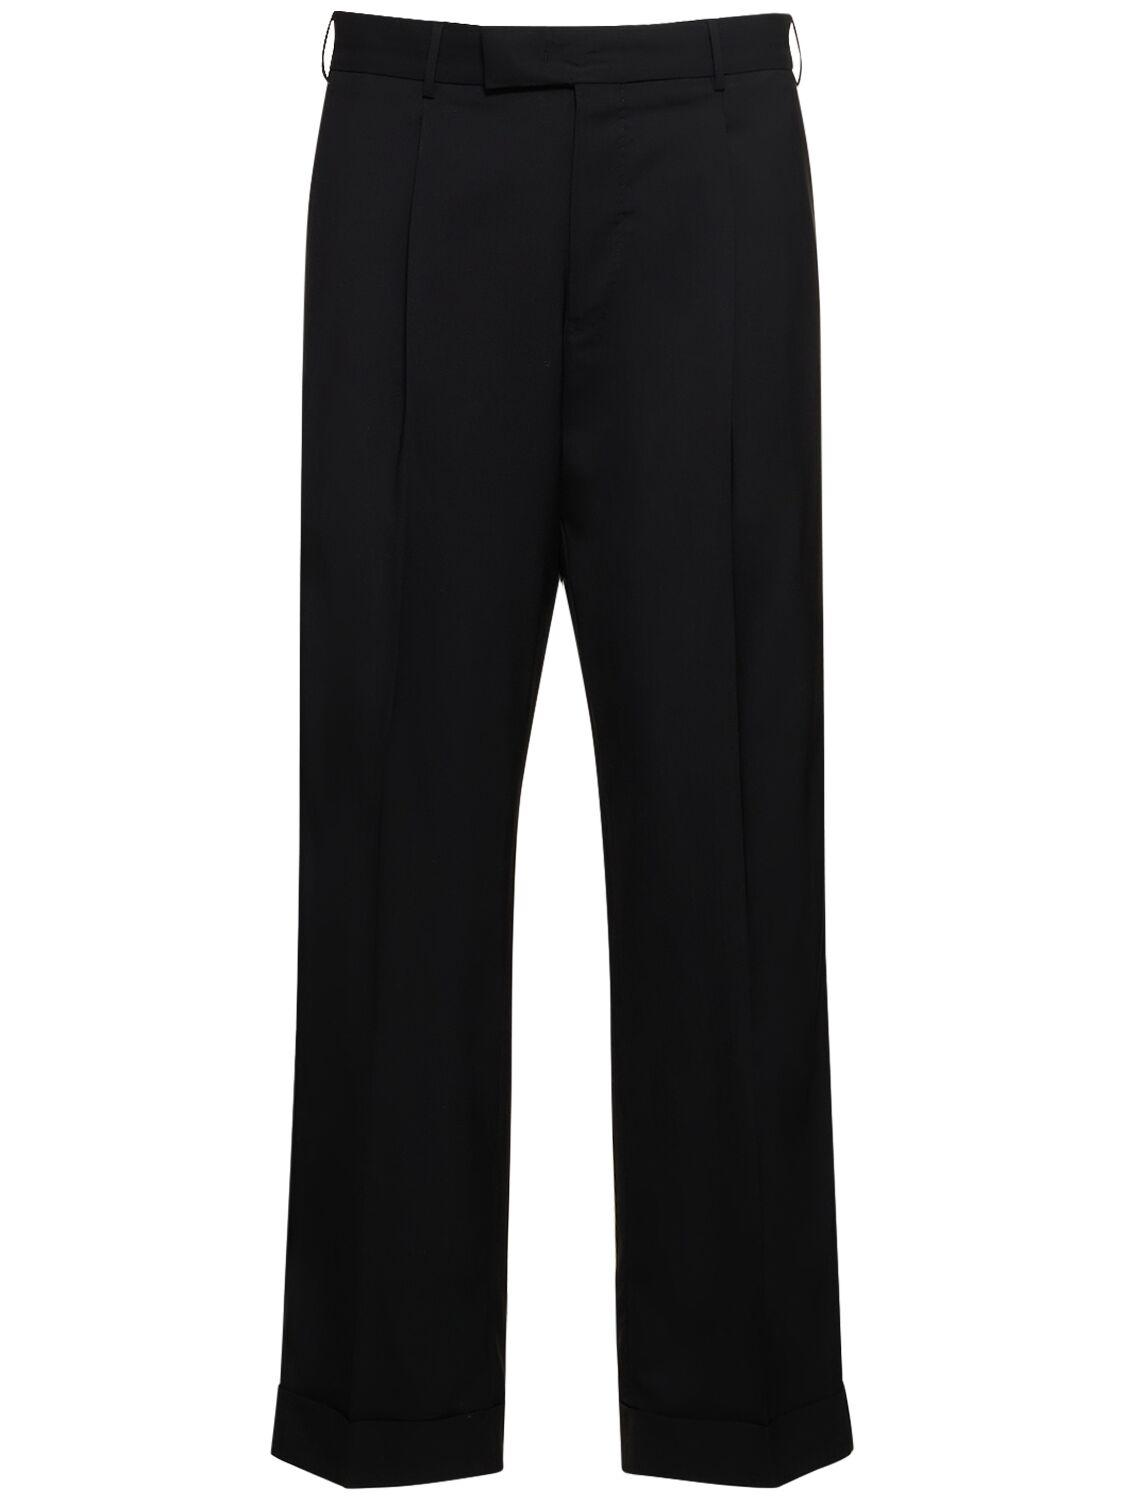 Pt Torino Quindici Light Wool Trousers In Black